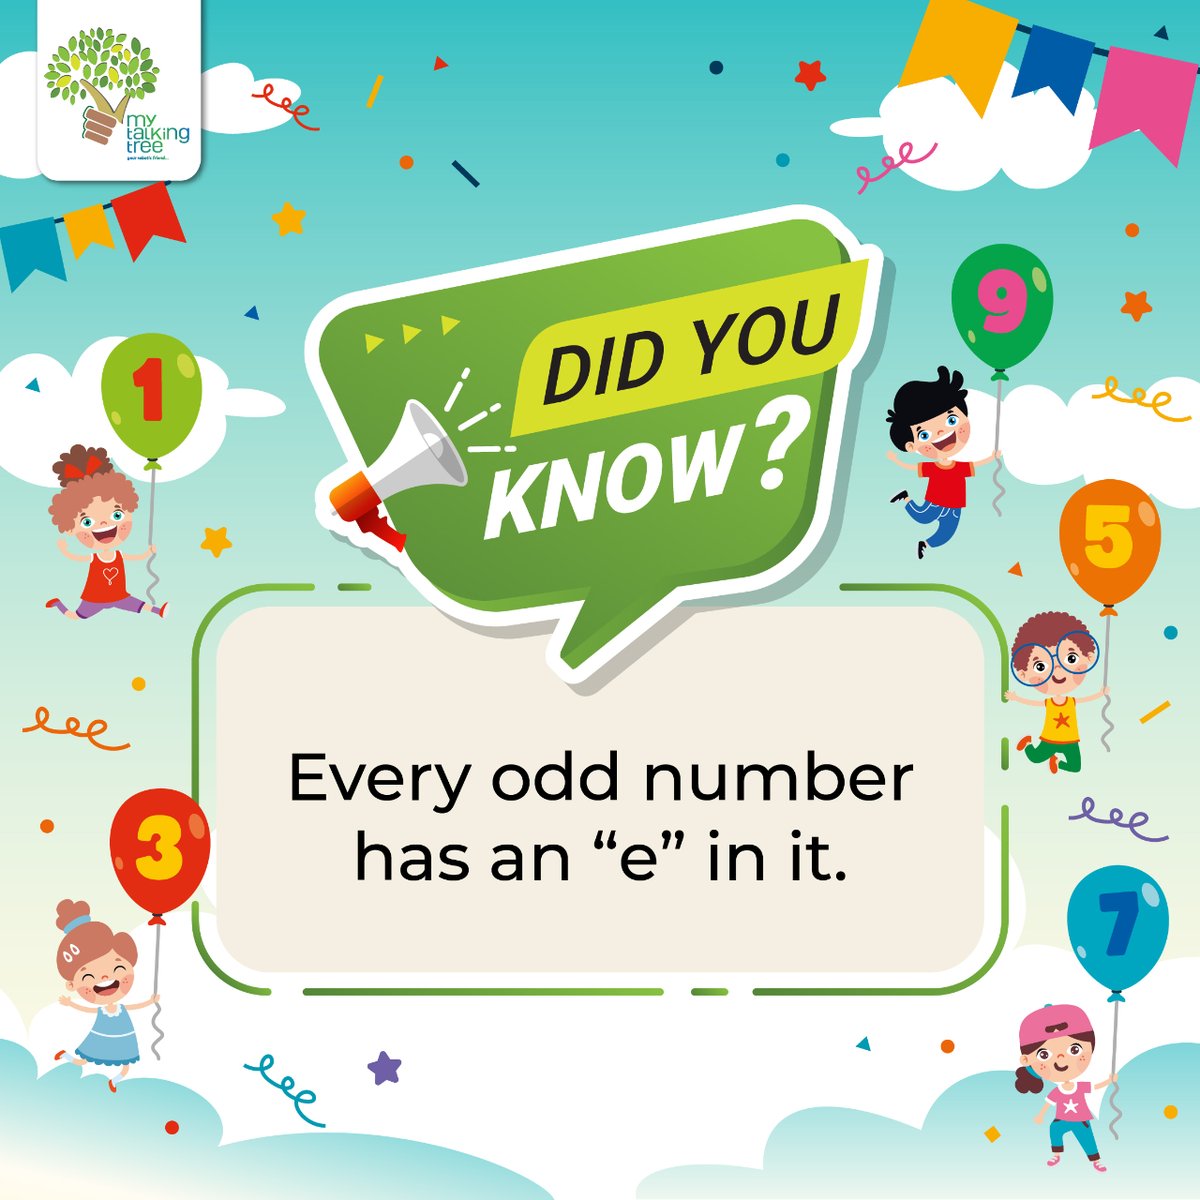 Did you know? The letter 'e' is present in all odd numbers, from one to nineteen.

#Mytalkingtree #FunFacts #DidYouKnow #FunFactFriday #Trivia #FactOfTheDay #FunFactOfTheDay #RandomFacts #InterestingFacts #mrdudu #robotic